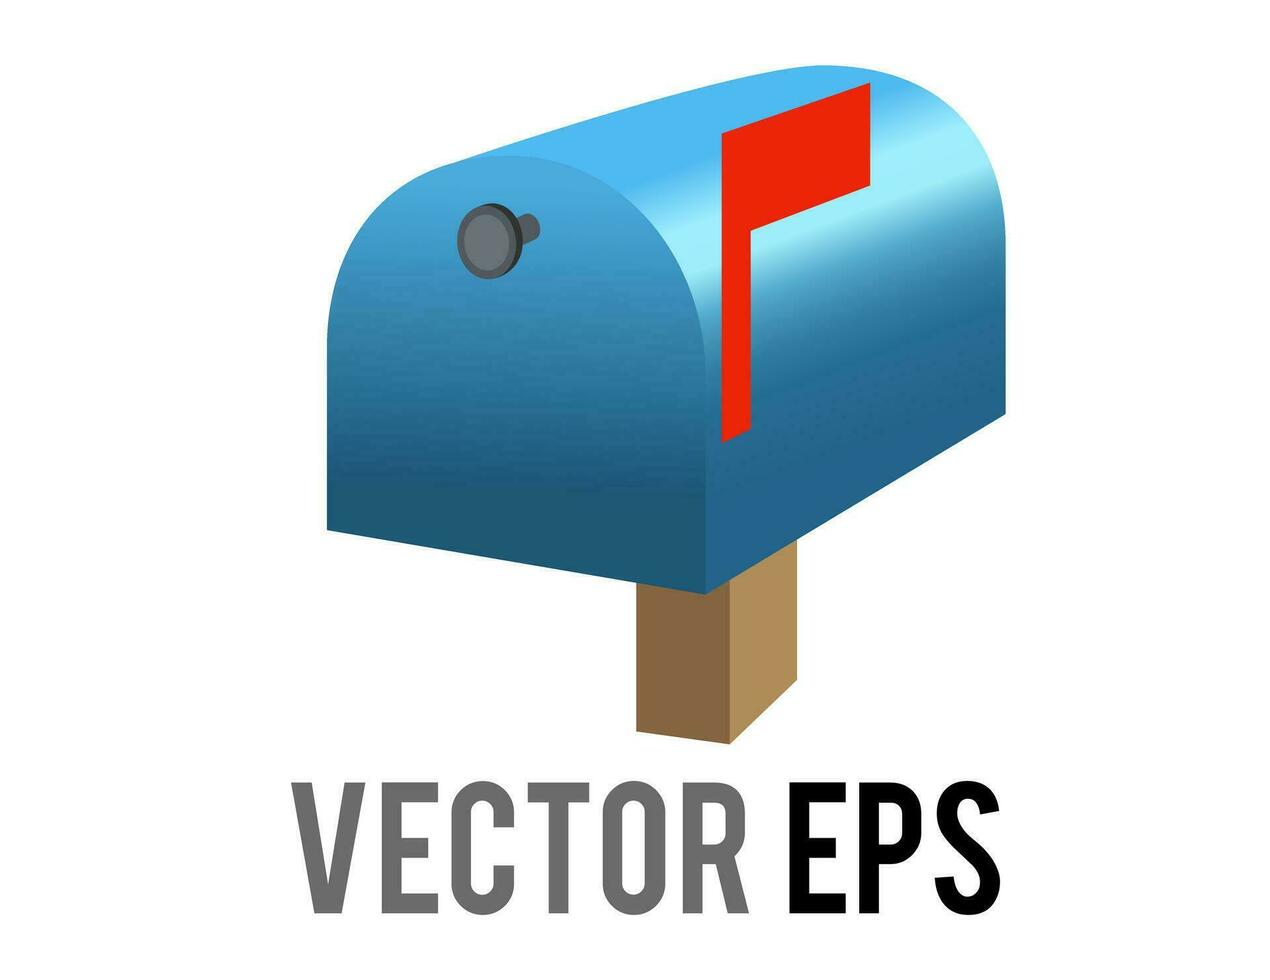 Vector blue close mailbox, letterbox, postbox icon with red raised flag